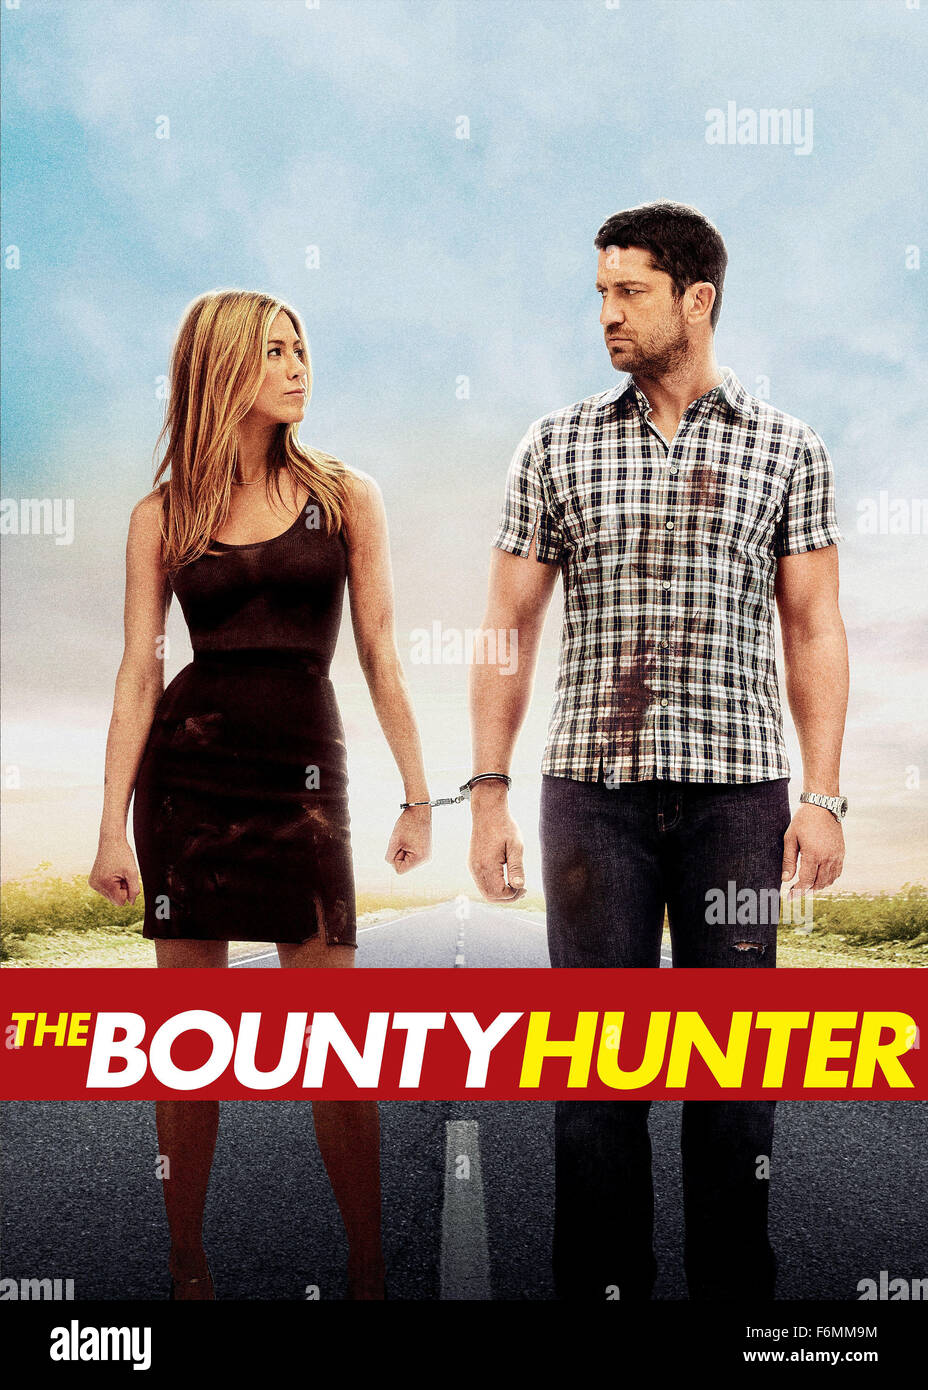 RELEASE DATE: March 19, 2010   MOVIE TITLE: The Bounty Hunter   STUDIO: Columbia Pictures   DIRECTOR: Andy Tennant  PLOT: A bounty hunter learns that his next target is his ex-wife, a reporter working on a murder cover-up. Soon after their reunion, the always-at-odds duo find themselves on a run-for-their-lives adventure   PICTURED: JENNIFER ANISTON as Nicole Hurley and GERARD BUTLER as Milo Boyd   (Credit Image: c Columbia Pictures/Entertainment Pictures) Stock Photo